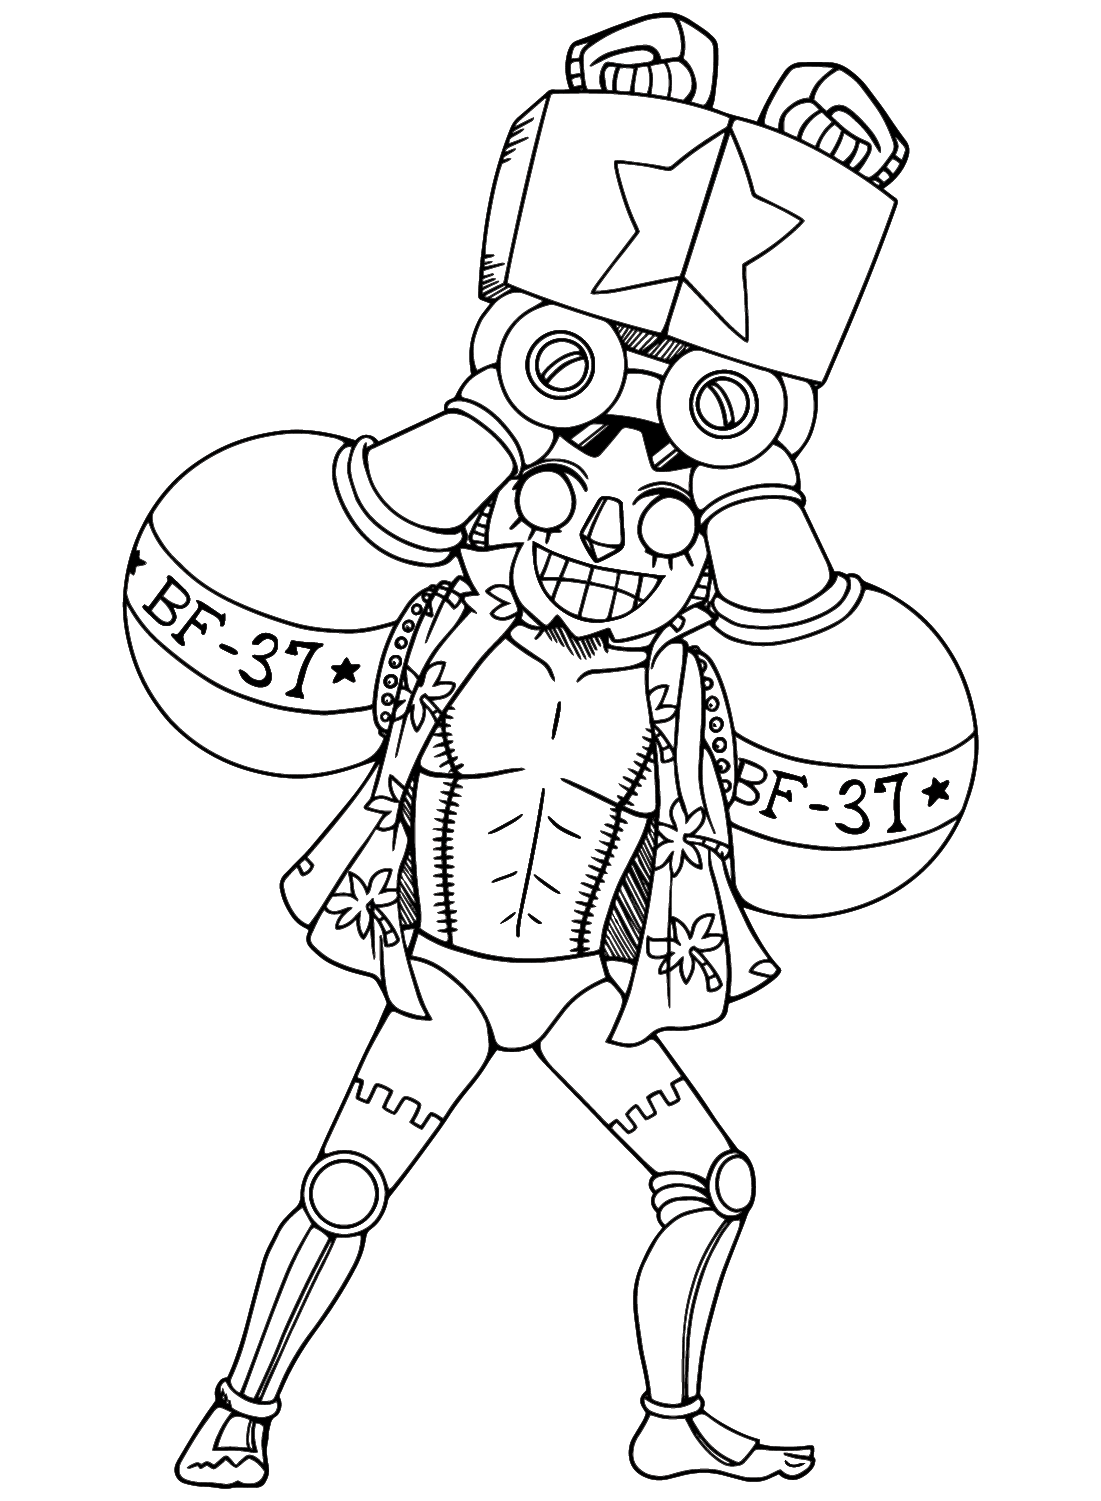 Franky Coloring Page PDF from Franky